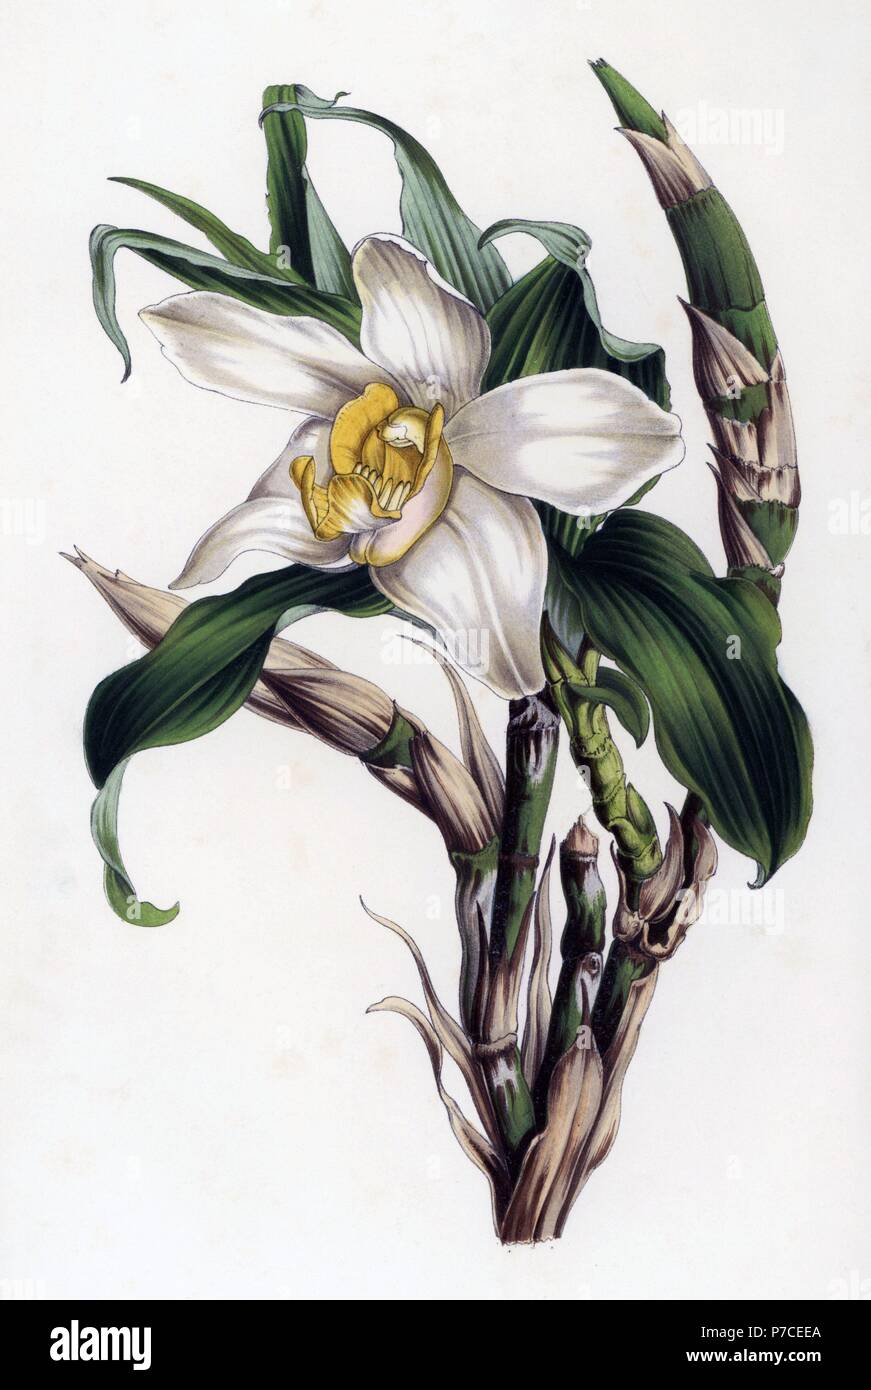 Bracteate chysis orchid, Chysis bractescens. Handcoloured lithograph by Stroobant from Louis van Houtte and Charles Lemaire's Flowers of the Gardens and Hothouses of Europe, Flore des Serres et des Jardins de l'Europe, Ghent, Belgium, 1851. Stock Photo